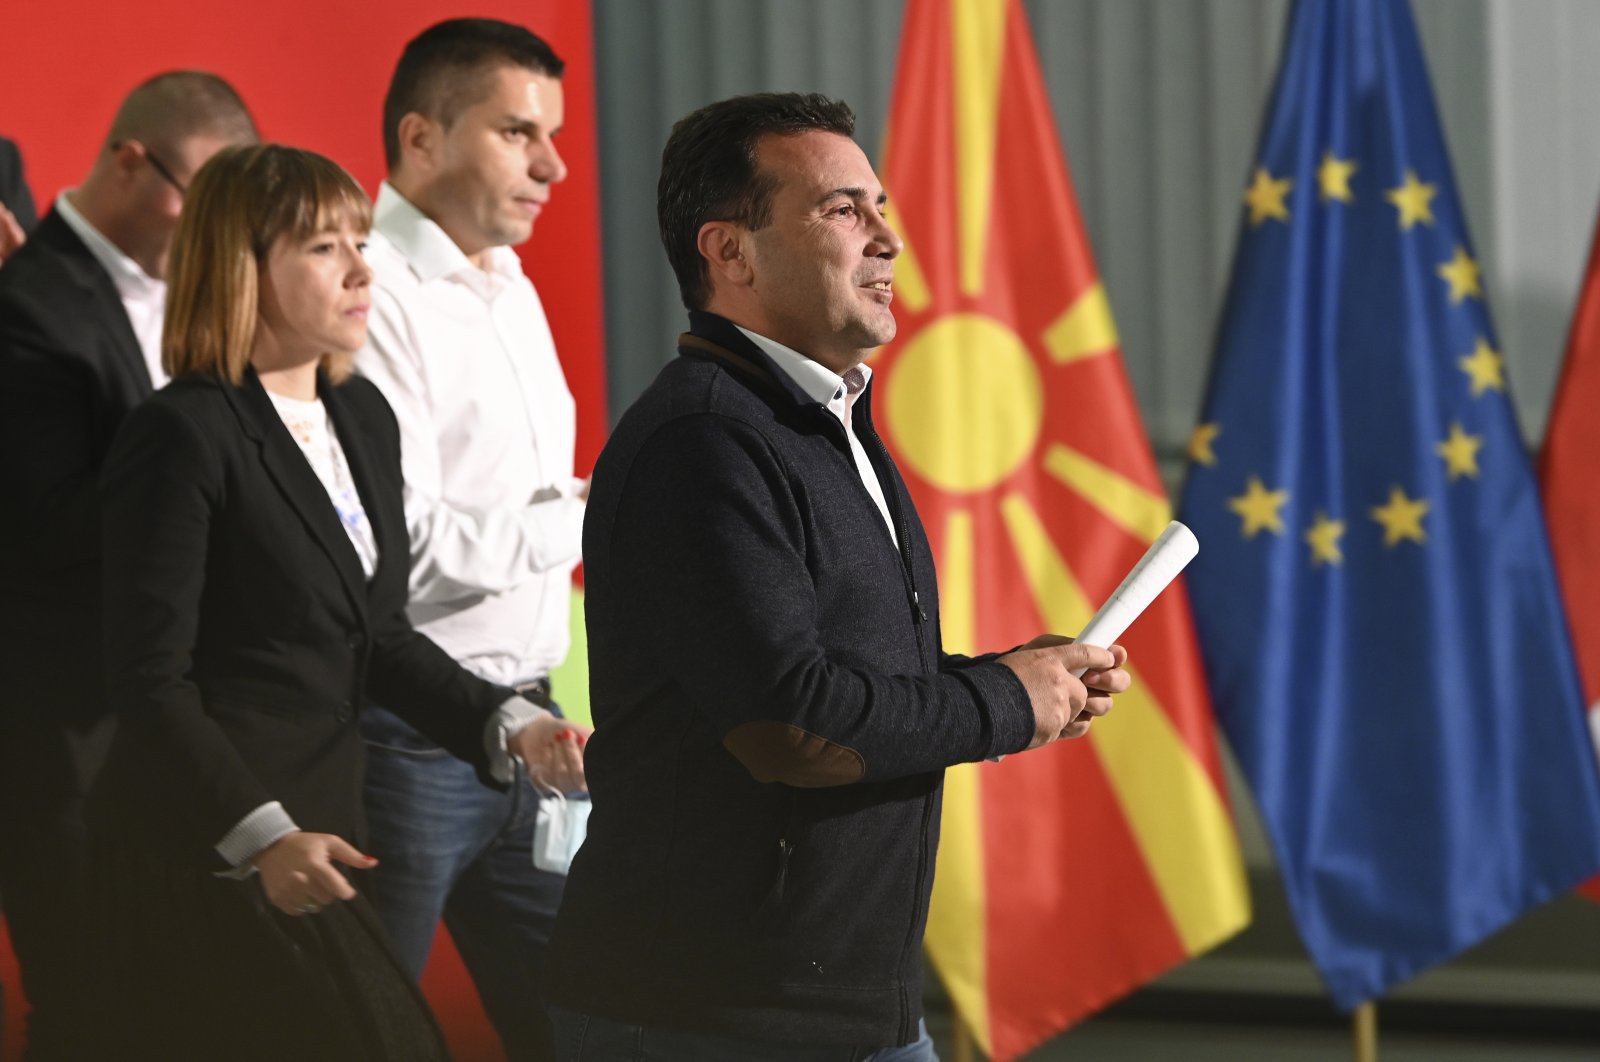 North Macedonia's Prime Minister Zoran Zaev, center, walks following a news conference at the party headquarters in Skopje, North Macedonia, Oct. 31, 2021. (AP Photo)